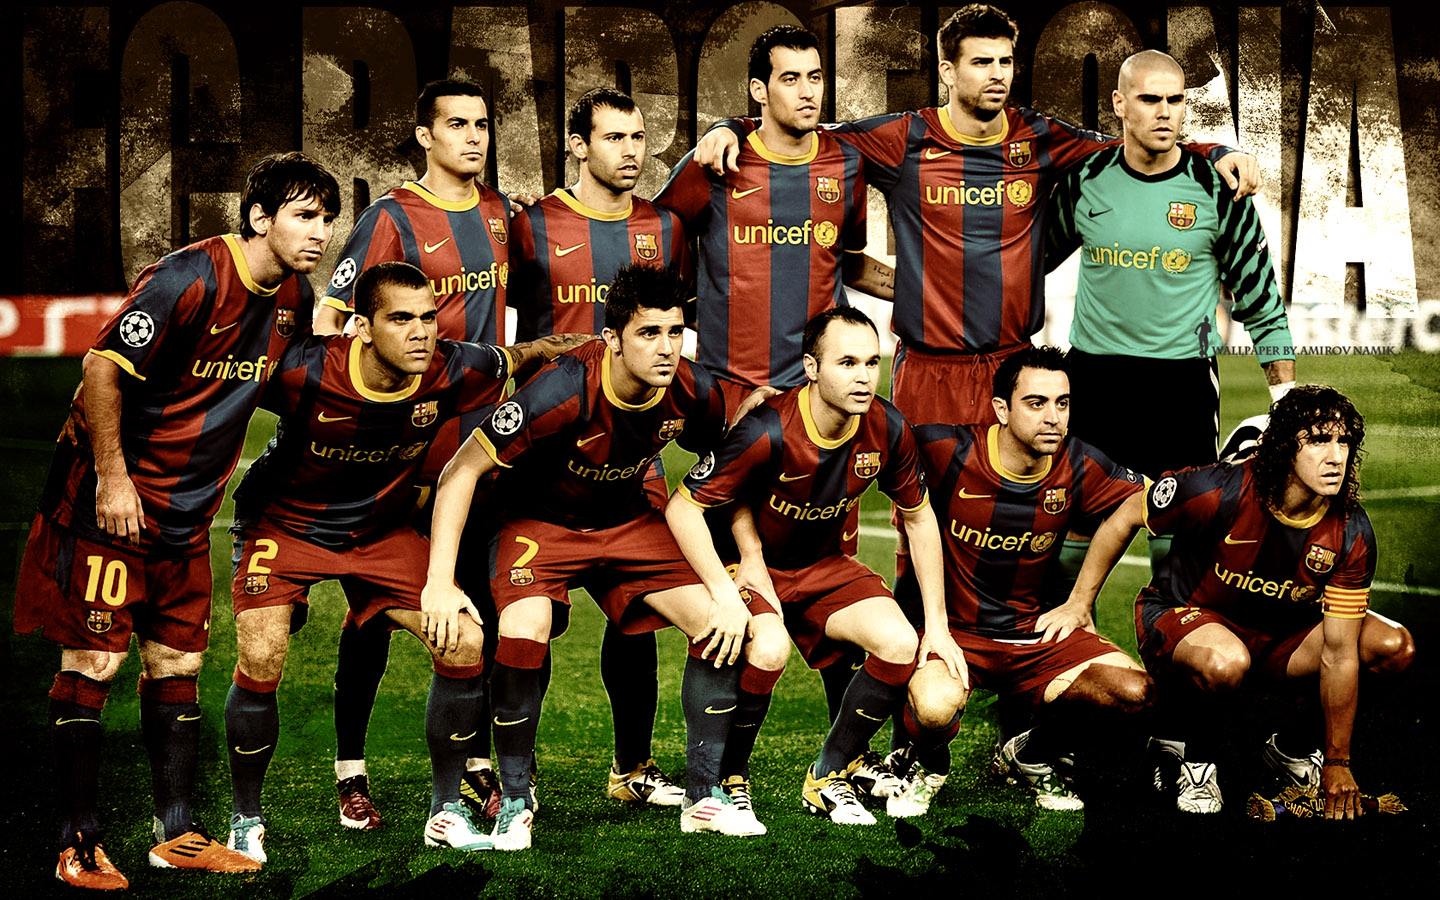 FC Barcelona Picture by Namik Amirov